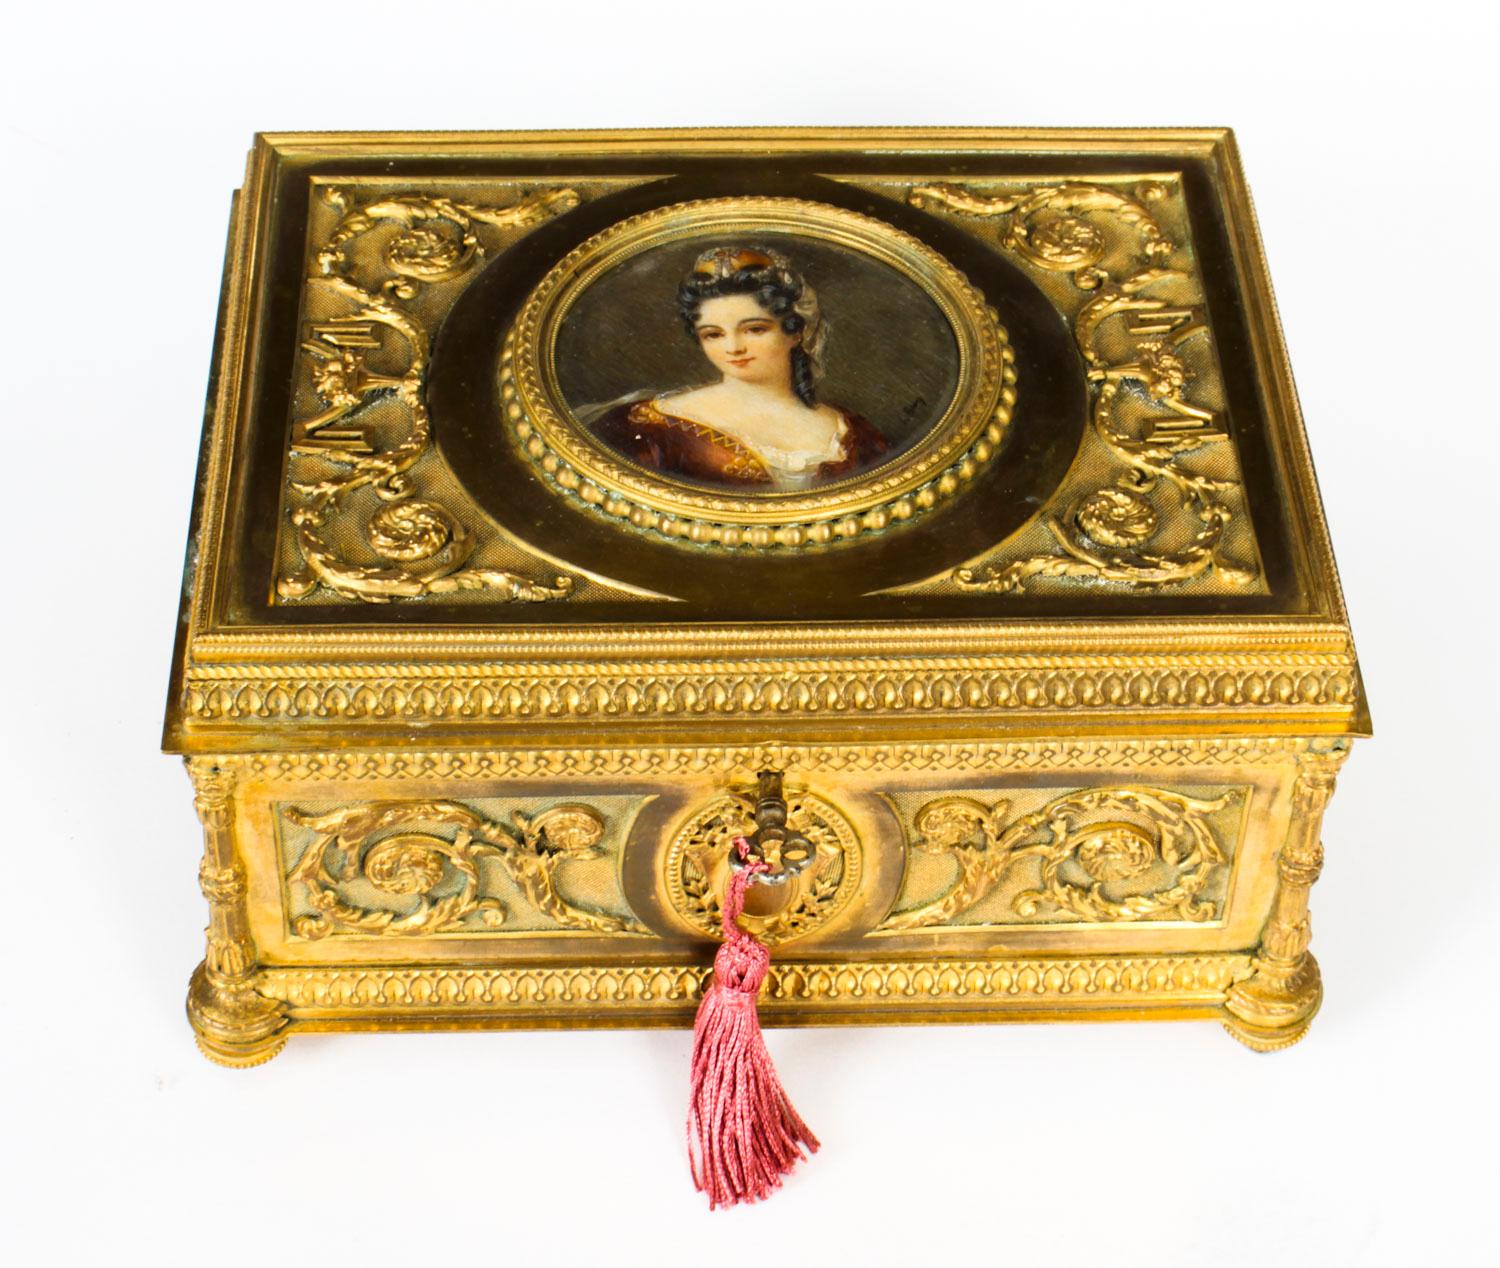 This is a beautiful antique French Palais Royale gilded bronze ormolu jewellery casket, circa 1820 in date.

The sides are decorated with armorial panels, scrolled acanthus leaves and floral vases. The hinged lid is set with a large circular